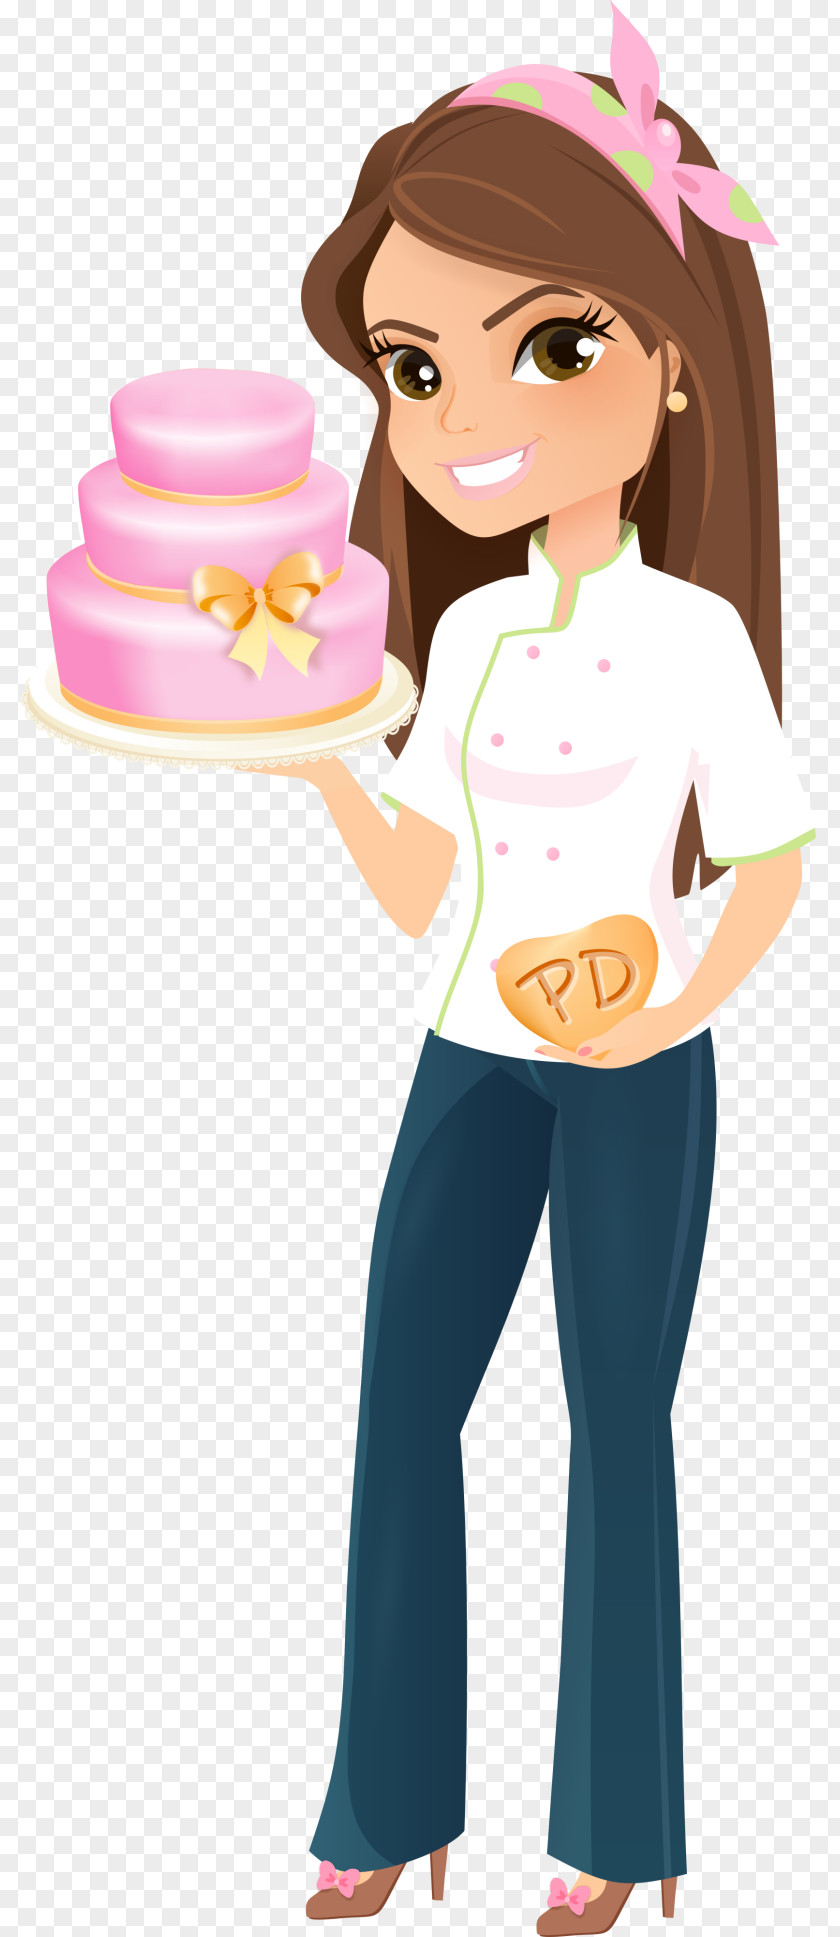 Cake Birthday Confectionery Store Mascot PNG